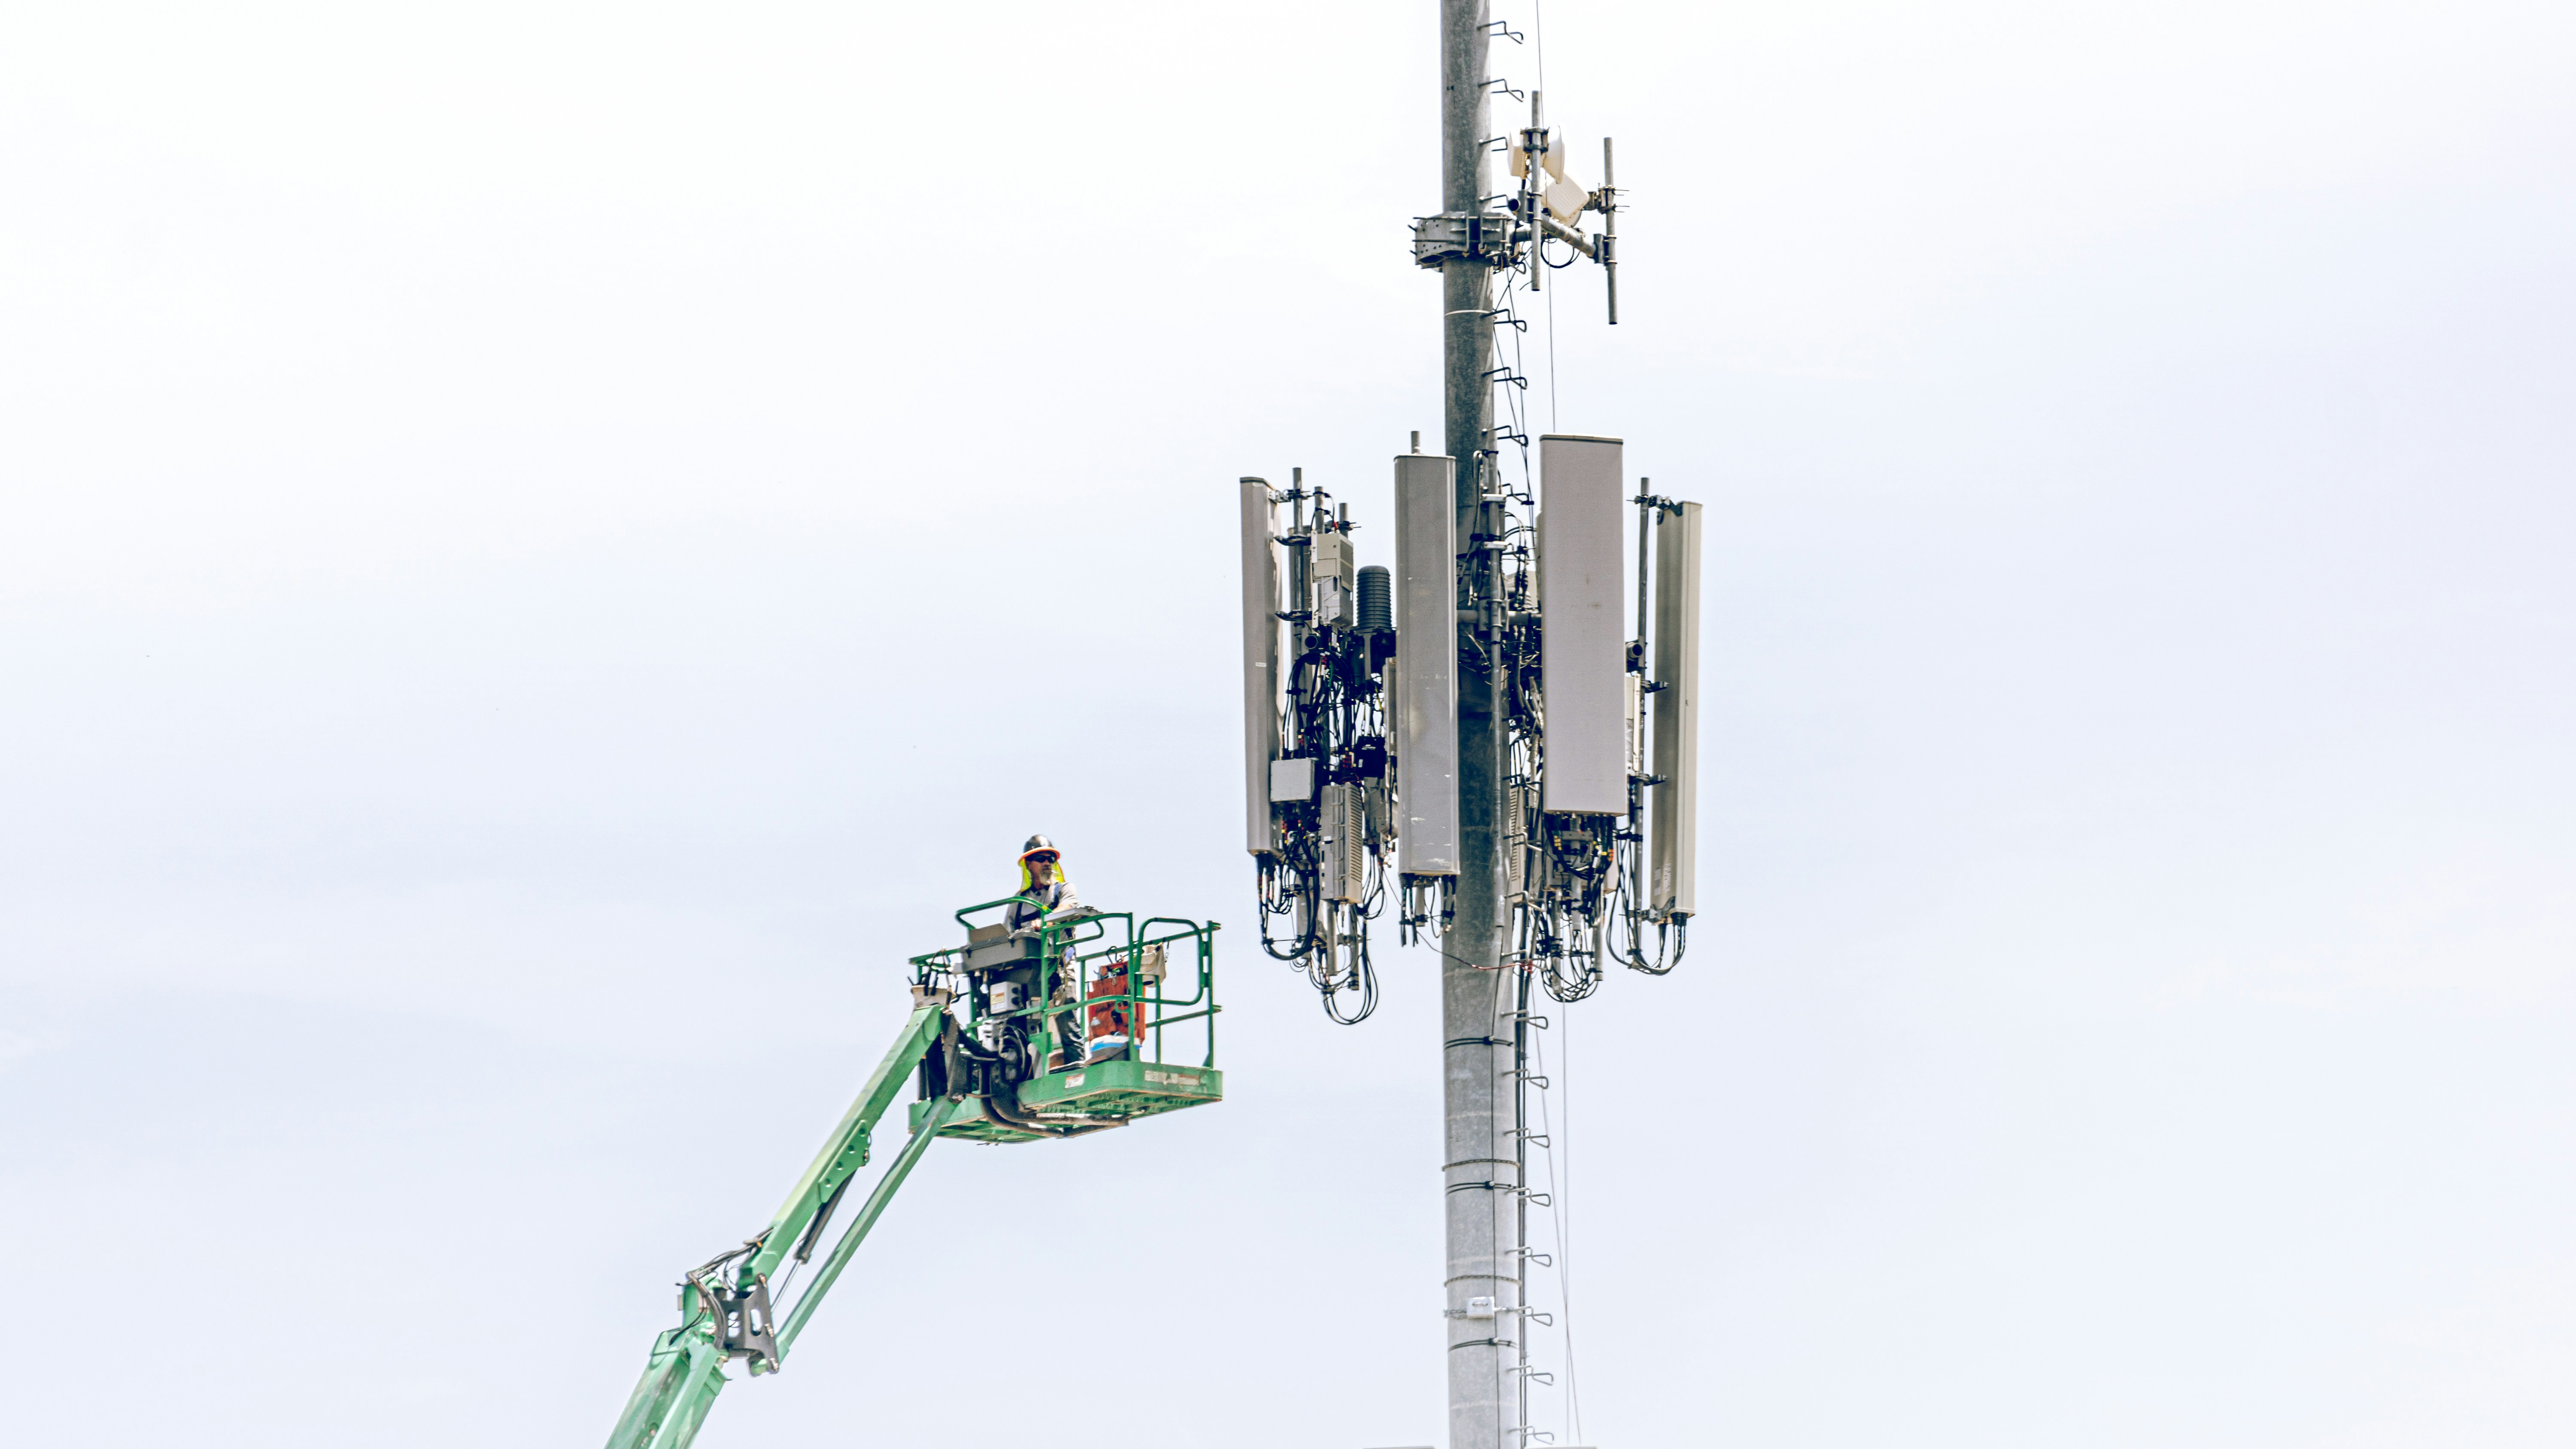 A man on a lift working on a phone tower.